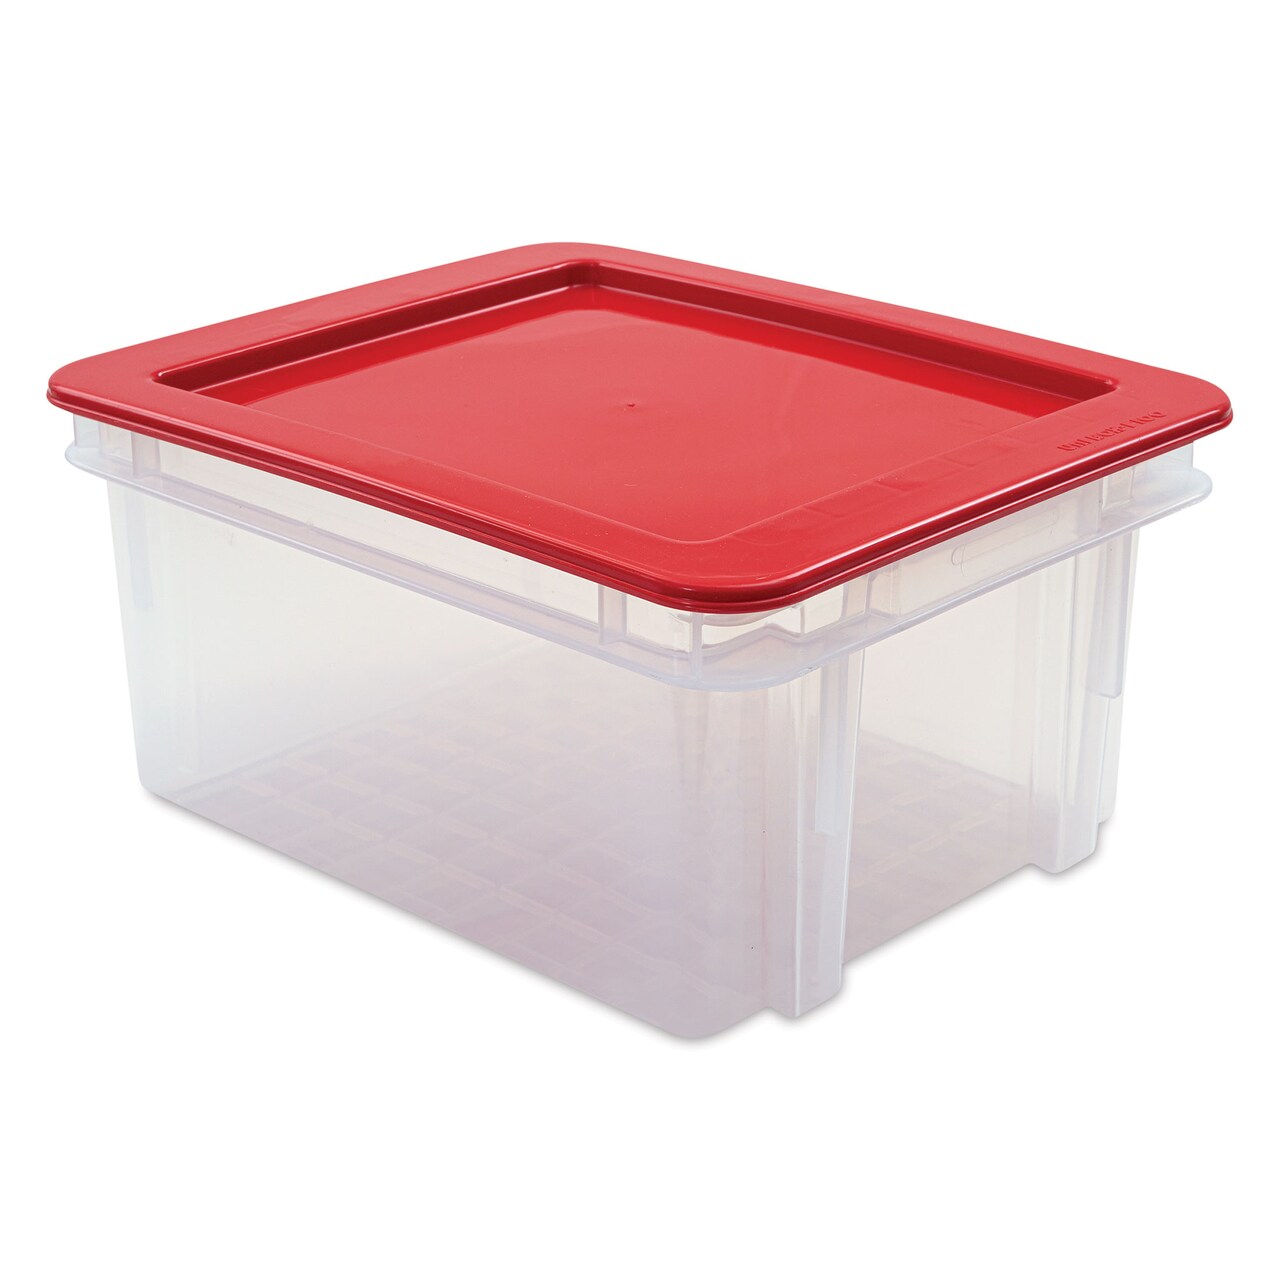 Dial Industries Tuft Tote with Lid - Small, Red Lid